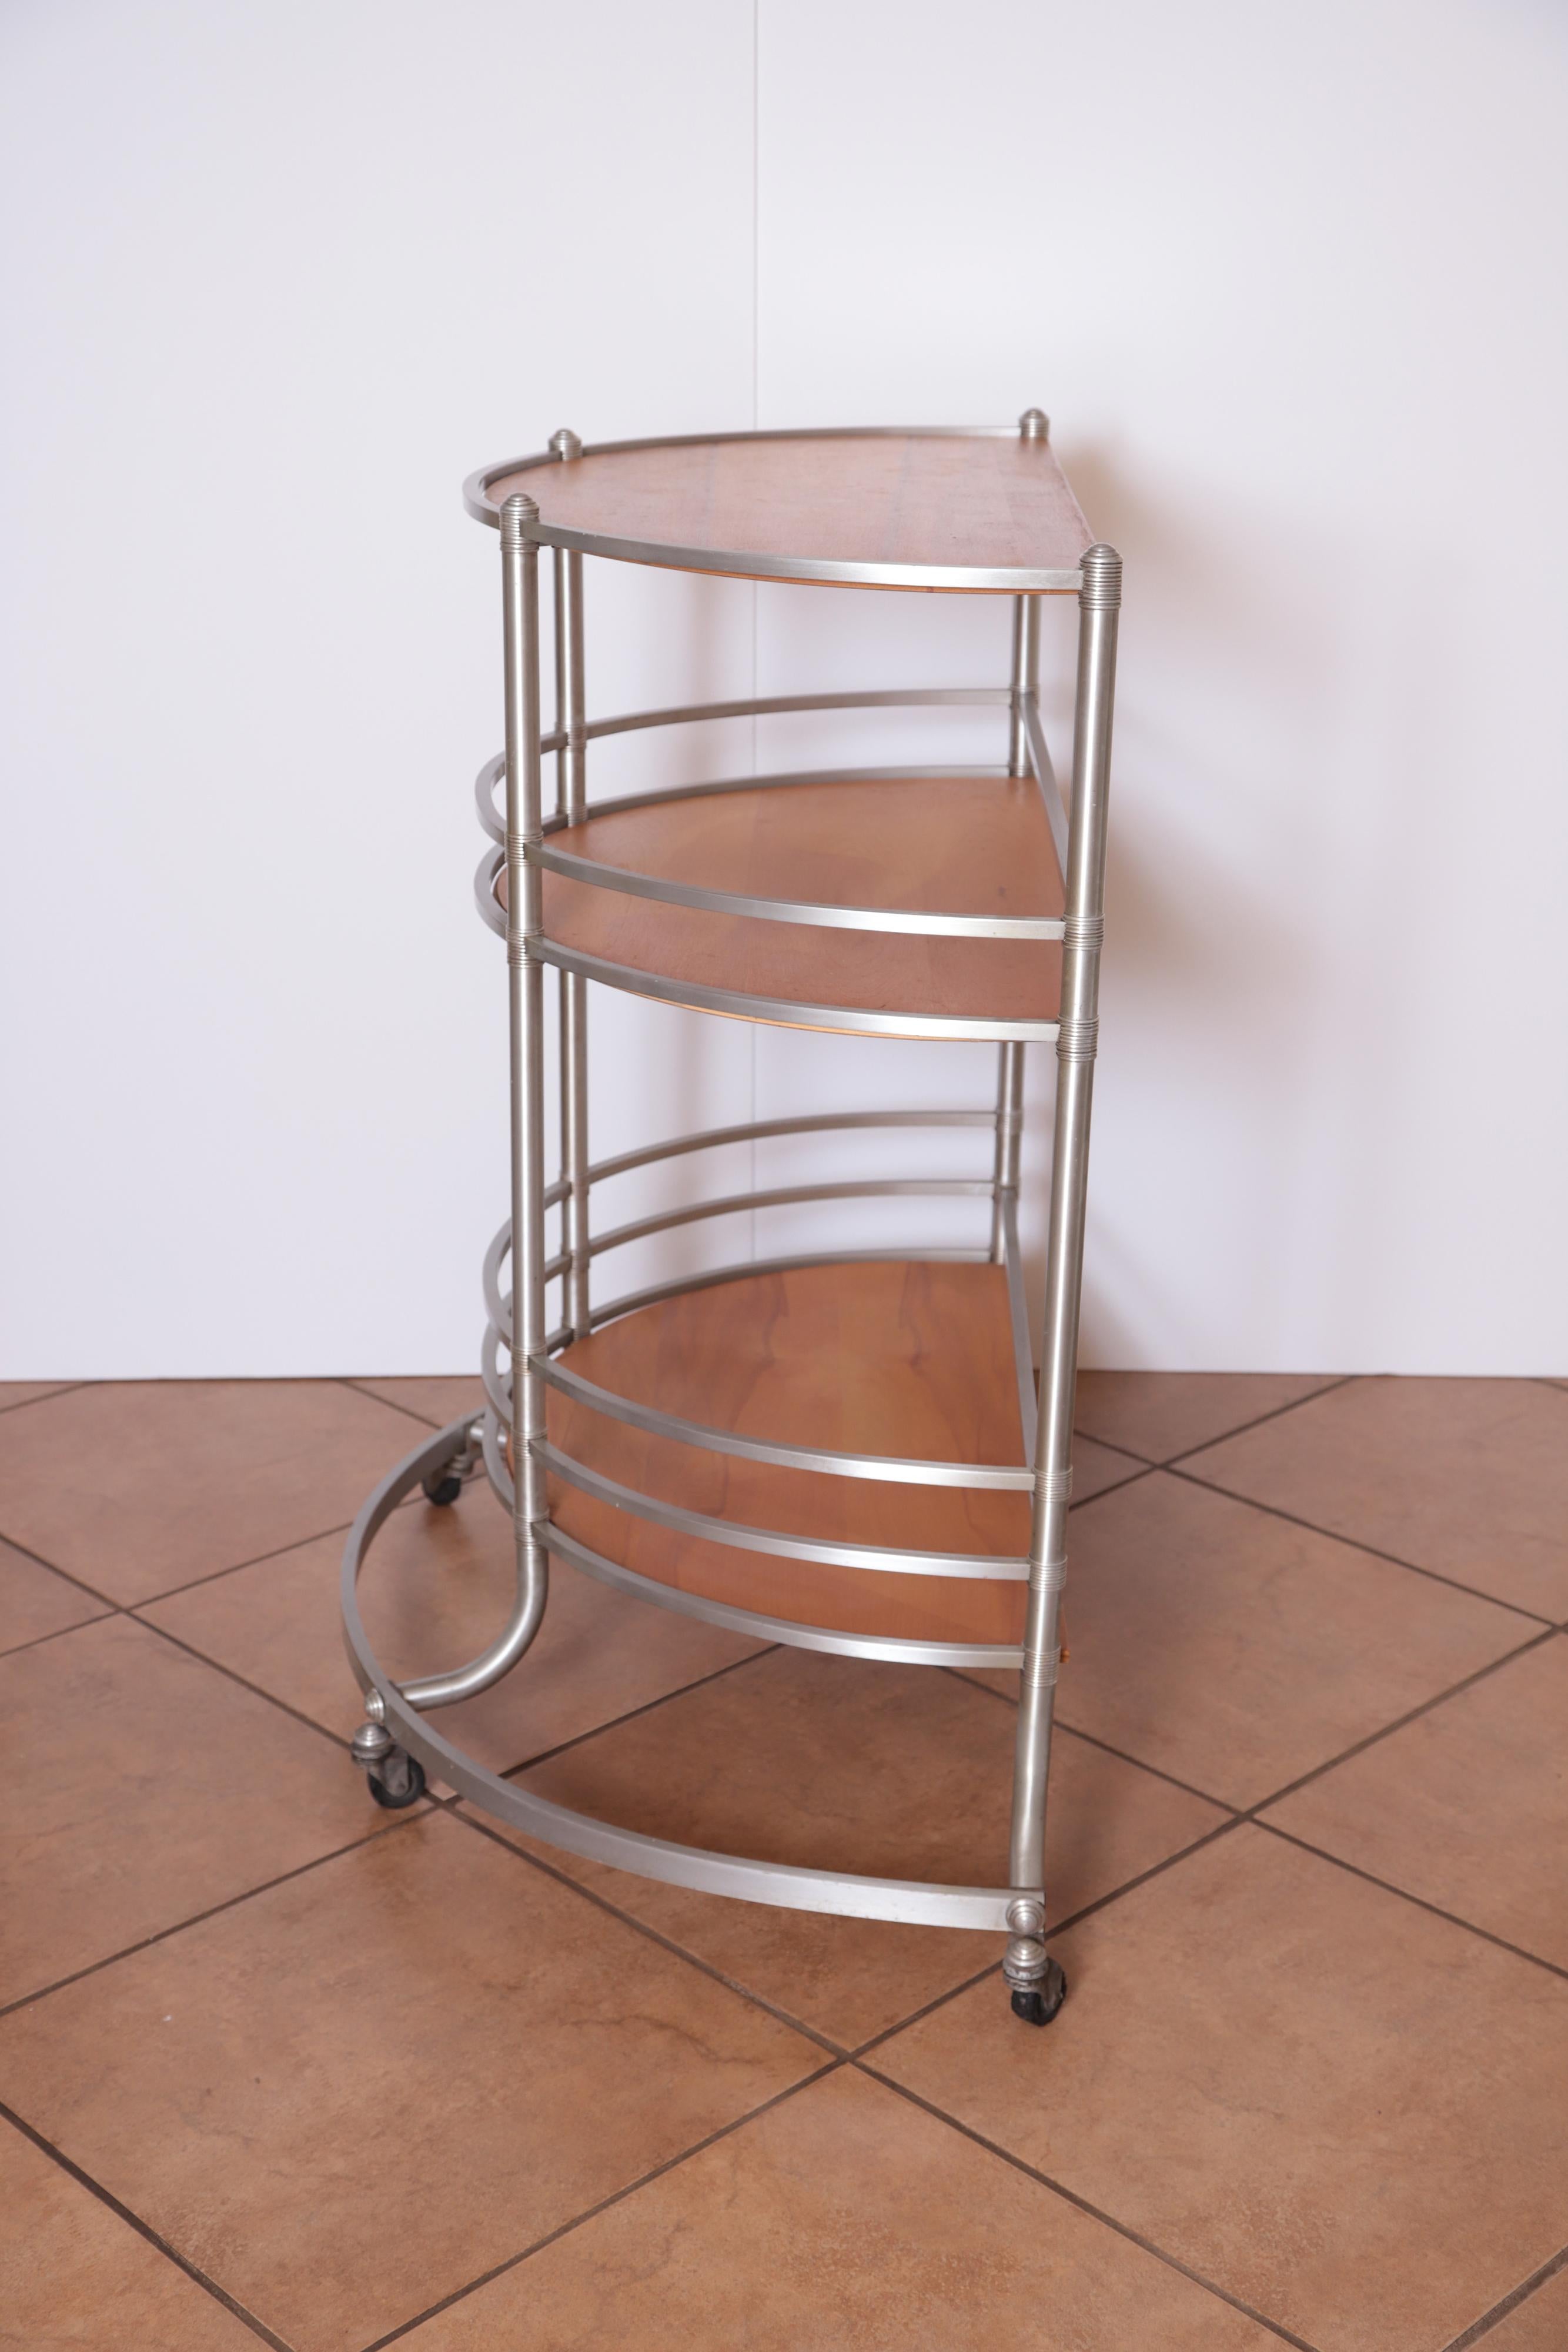 Machine Age Art Deco Warren McArthur Bar Anodized Aluminum Free-Standing Reduced In Good Condition For Sale In Dallas, TX